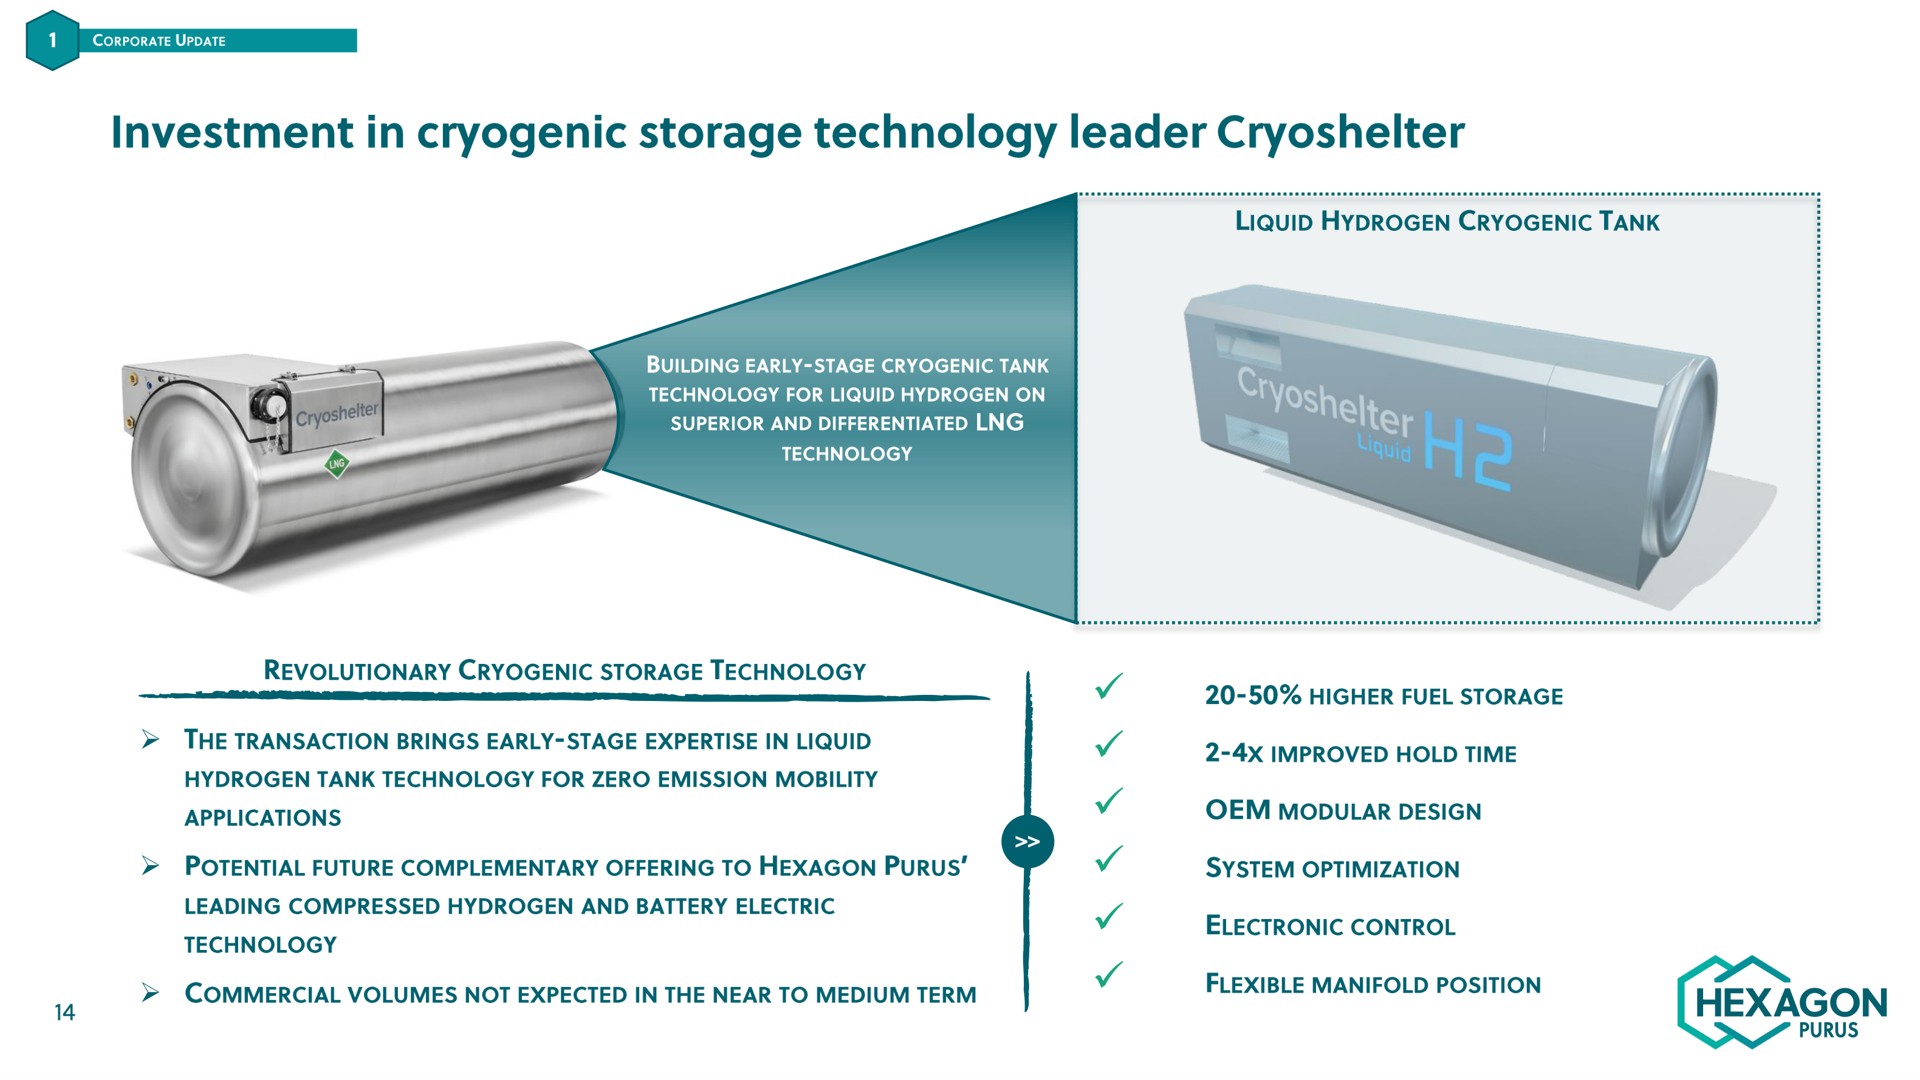 investment in cryogenic storage technology leader | Hexagon Purus